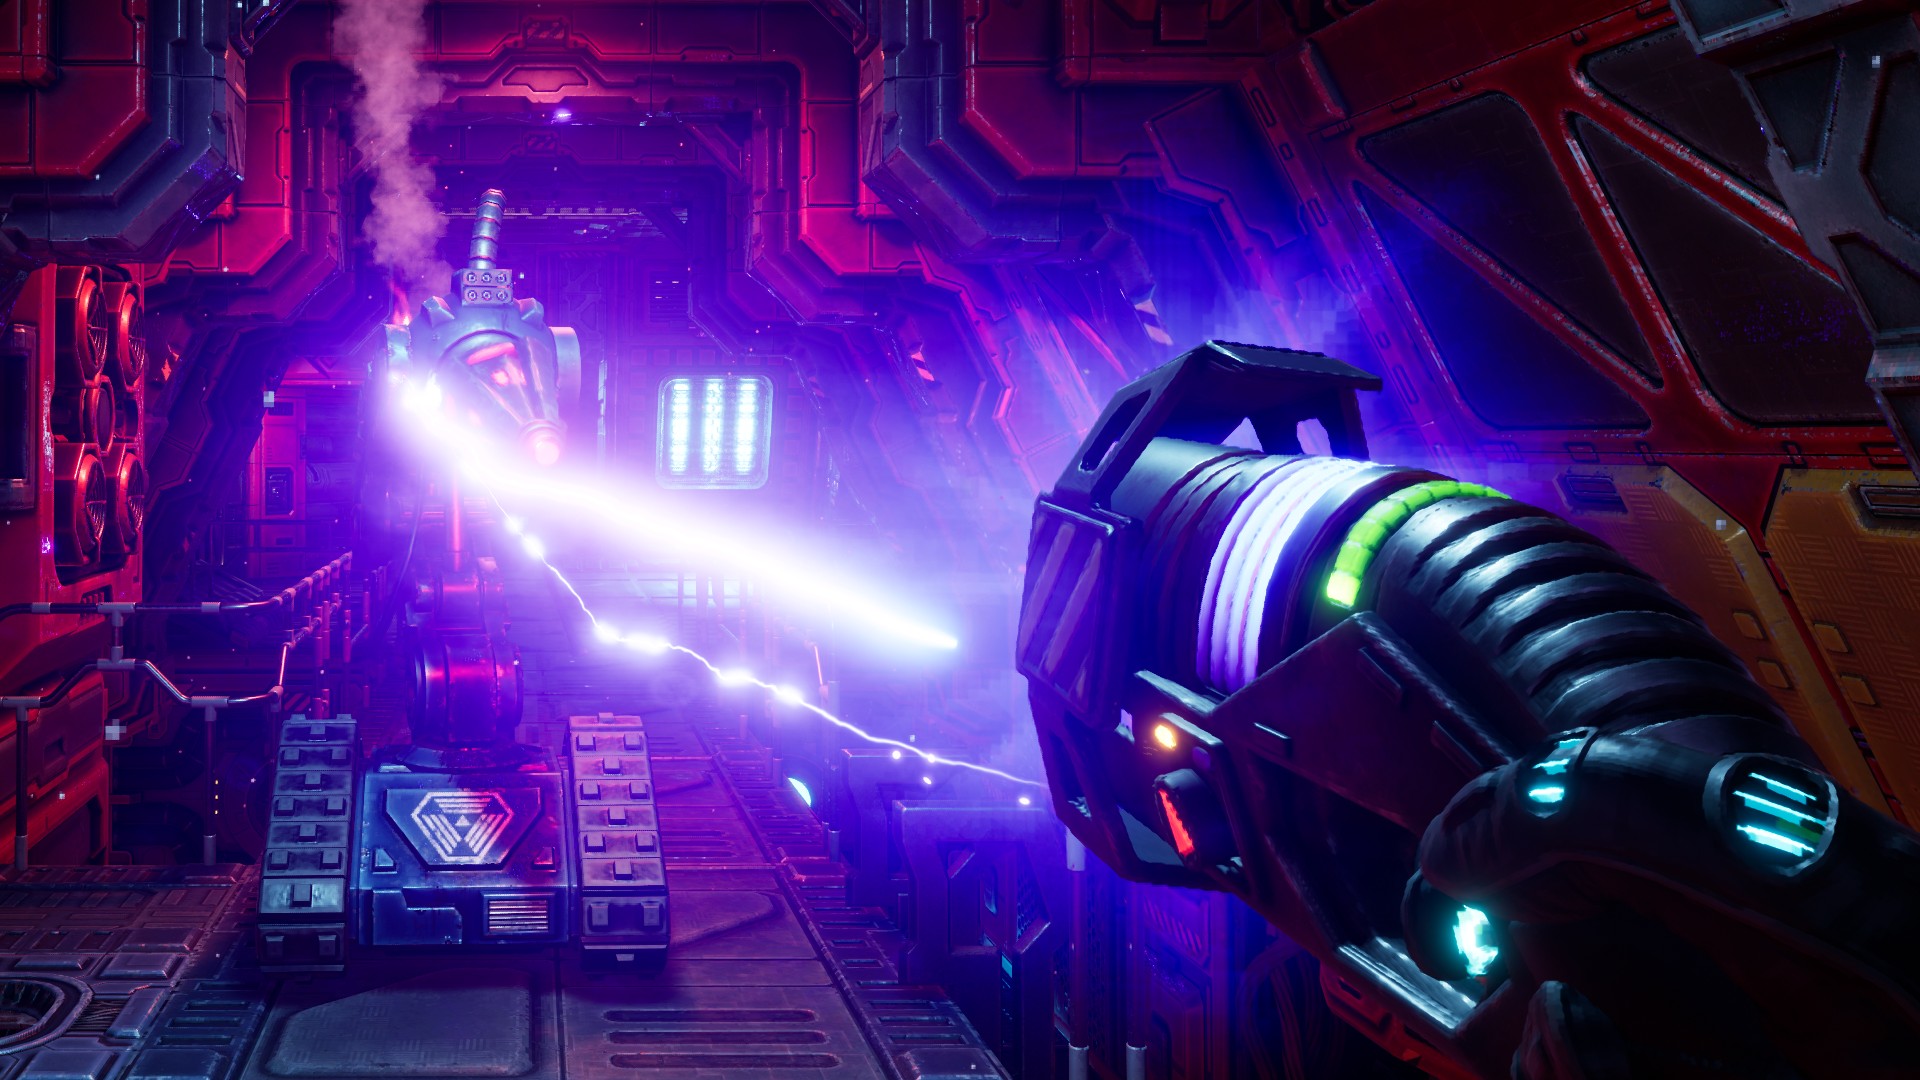 system-shock-demo-available-right-now-for-iconic-fps-game-remake